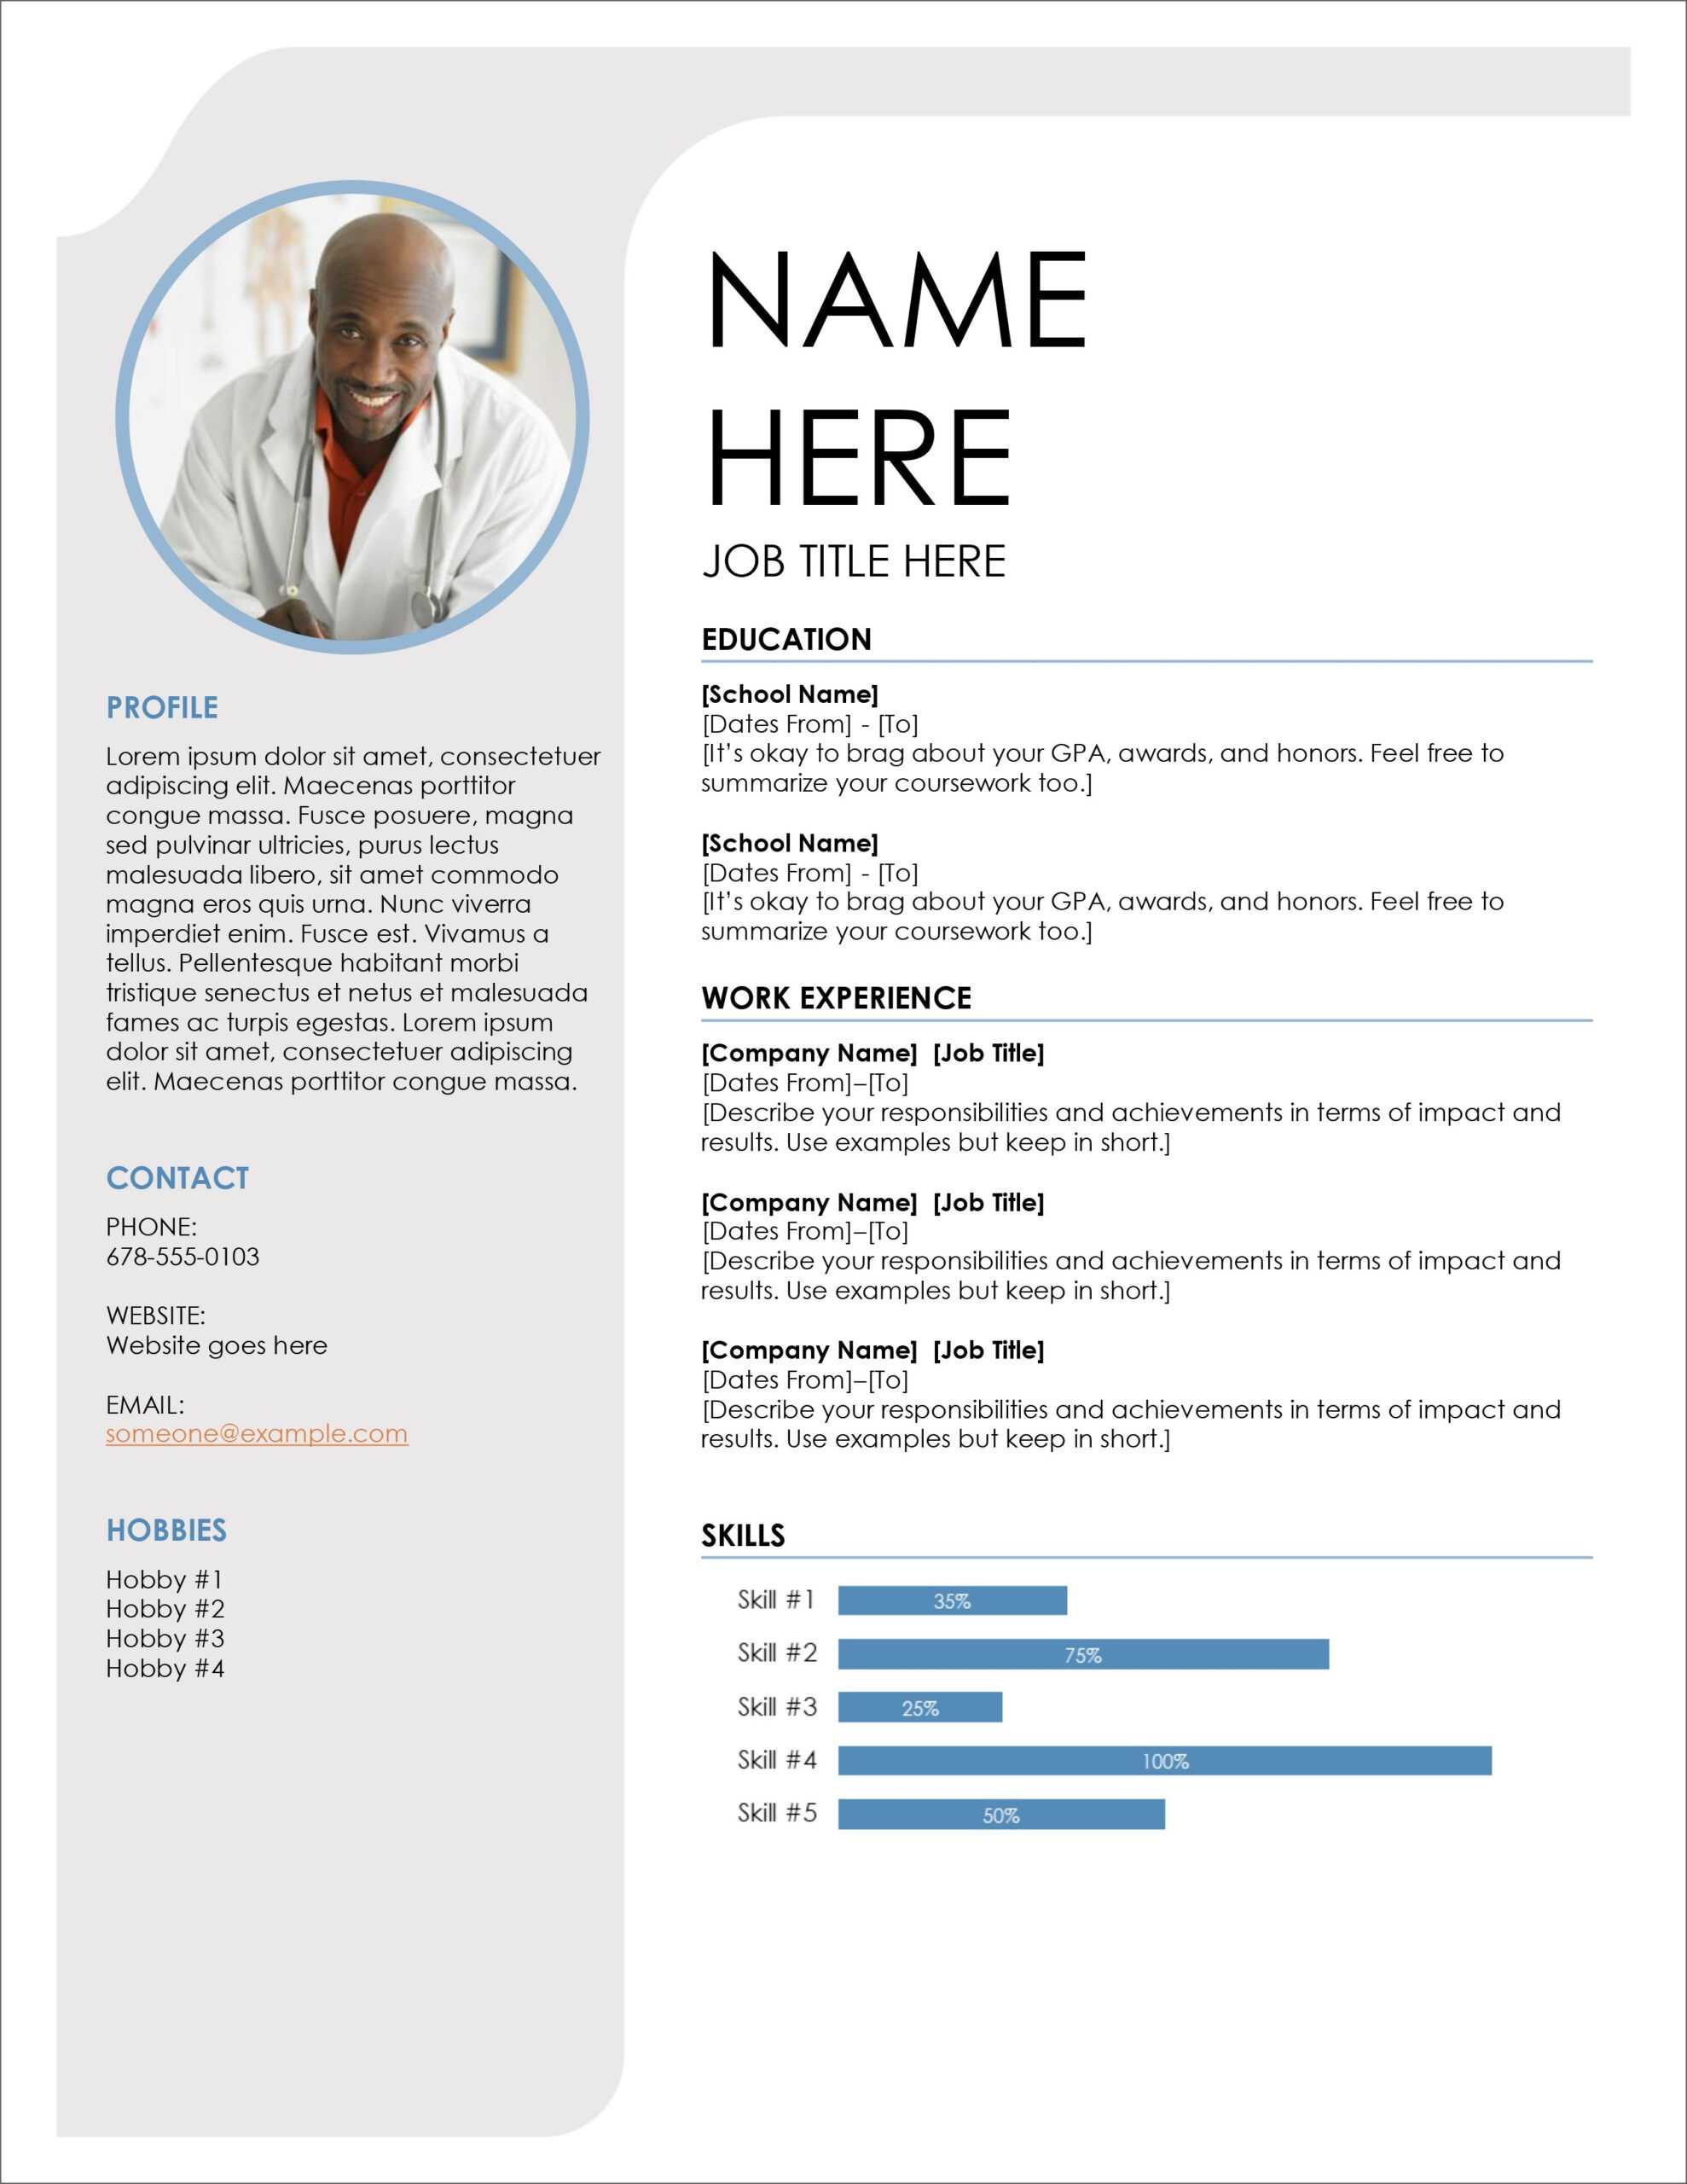 Cv Format Professional Free Download Downloadable Resume Regarding Free Downloadable Resume Templates For Word